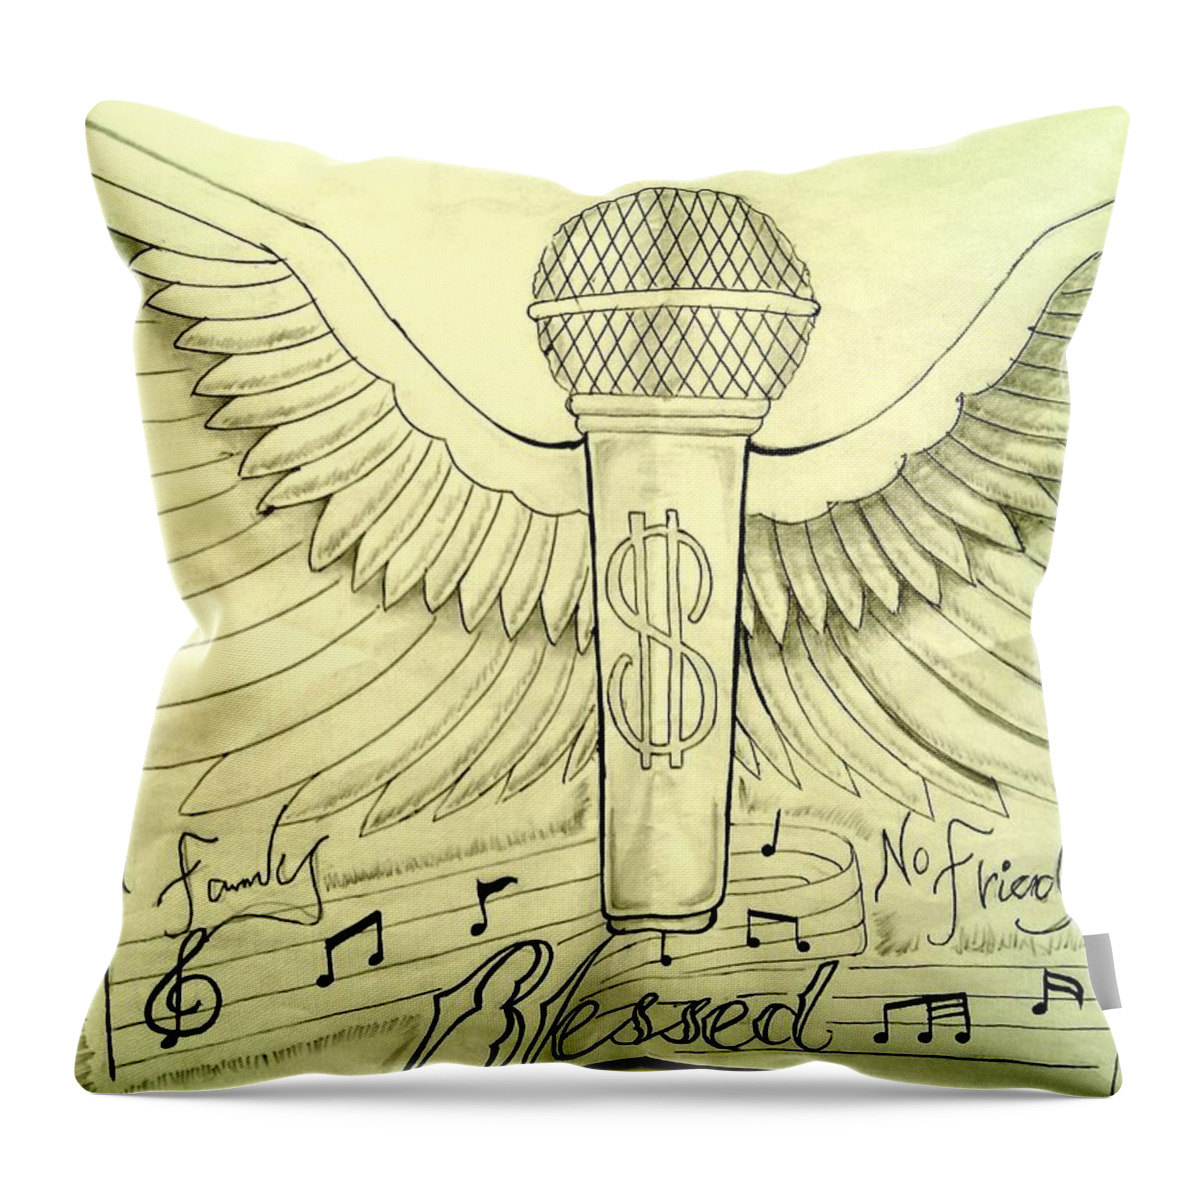 Black Art Throw Pillow featuring the drawing Untitled 8 by A S 